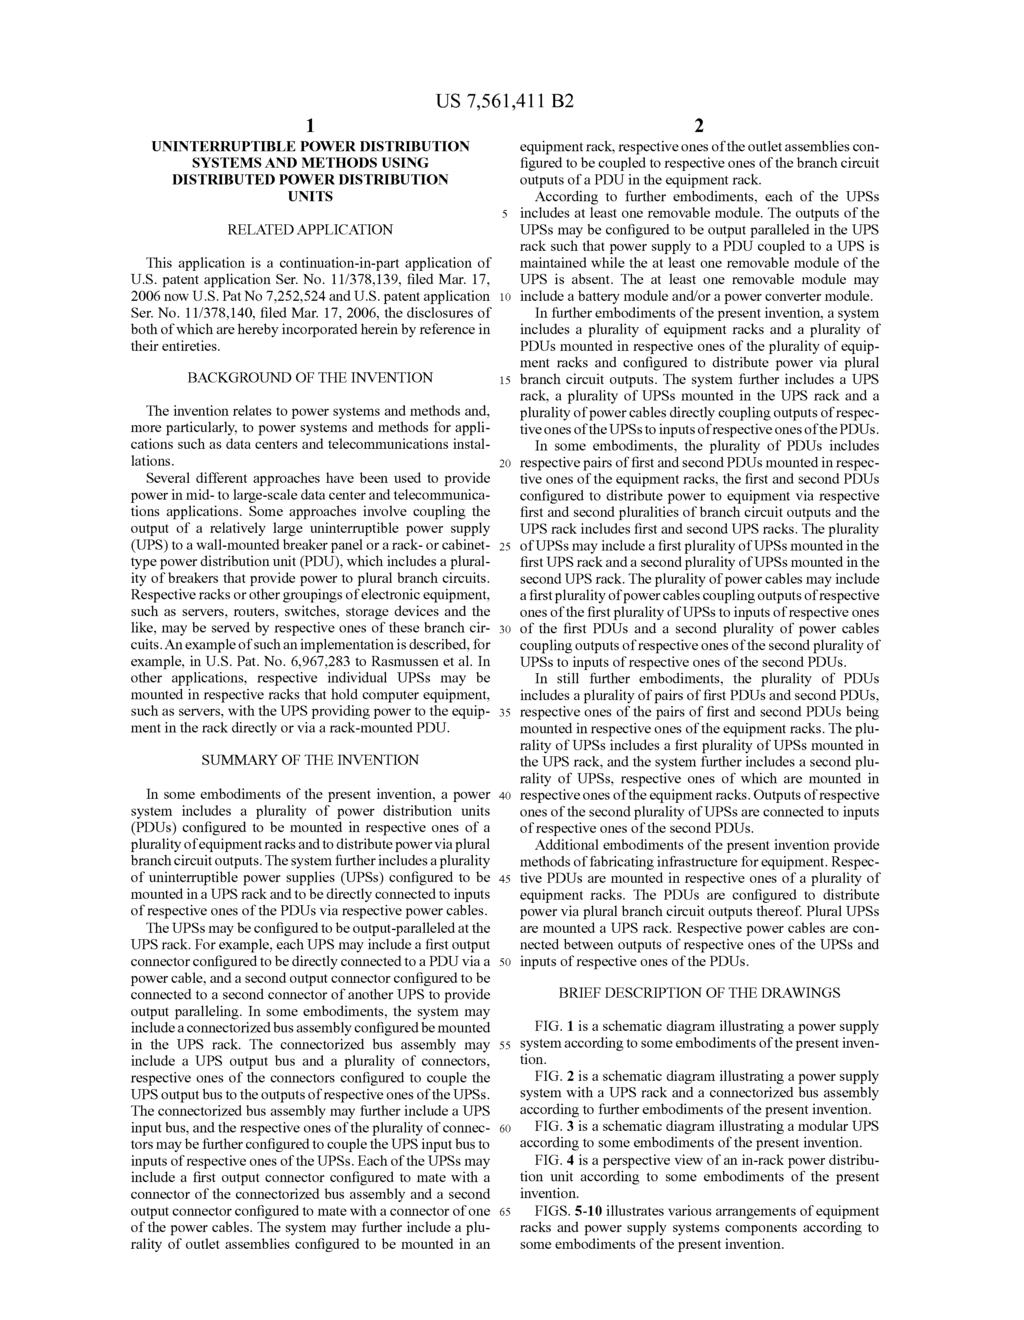 1. UNINTERRUPTIBLE POWER DISTRIBUTION SYSTEMS AND METHODS USING DISTRIBUTED POWER DISTRIBUTION UNITS RELATED APPLICATION This application is a continuation-in-part application of U.S. patent application Ser.